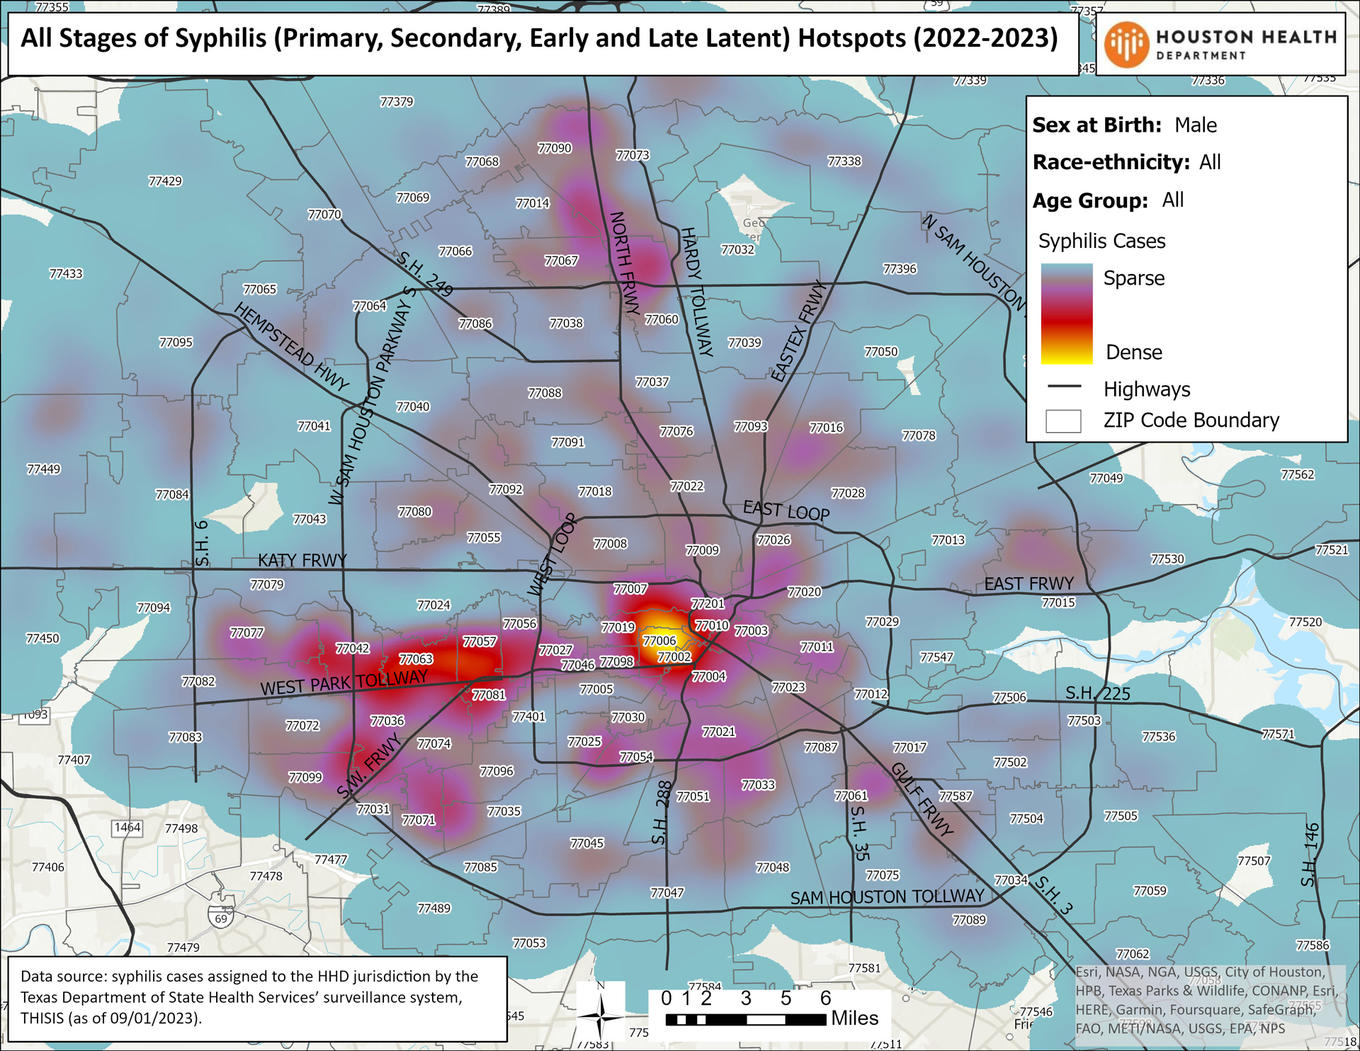 All stages of syphilis (primary, secondary, early and late latent) hotspots (2022-2023). Sex at birth: male